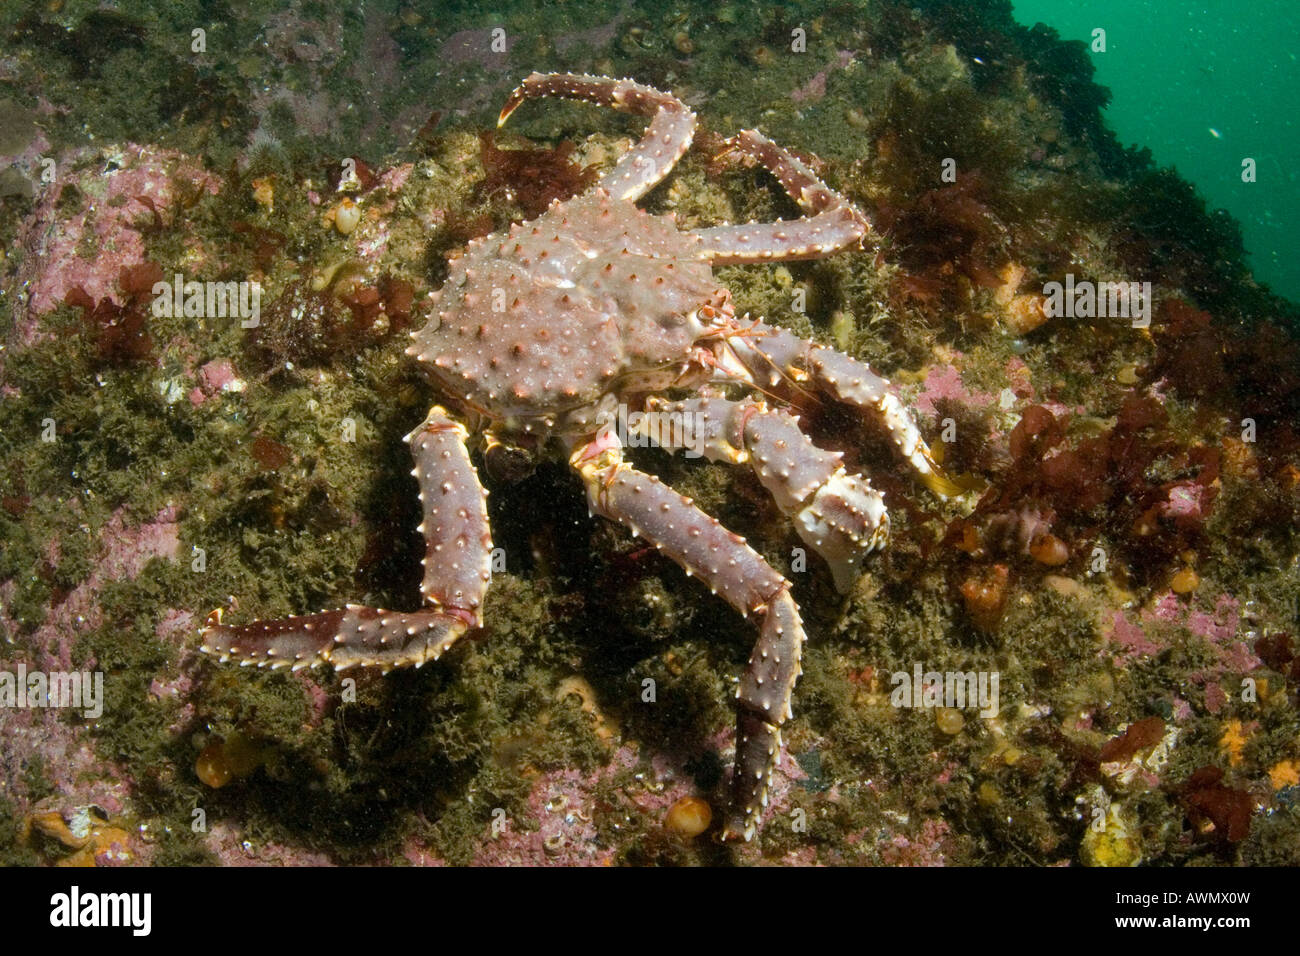 Red king crab (Paralithodes camtschatica). Mare di Barents, Russia Foto Stock